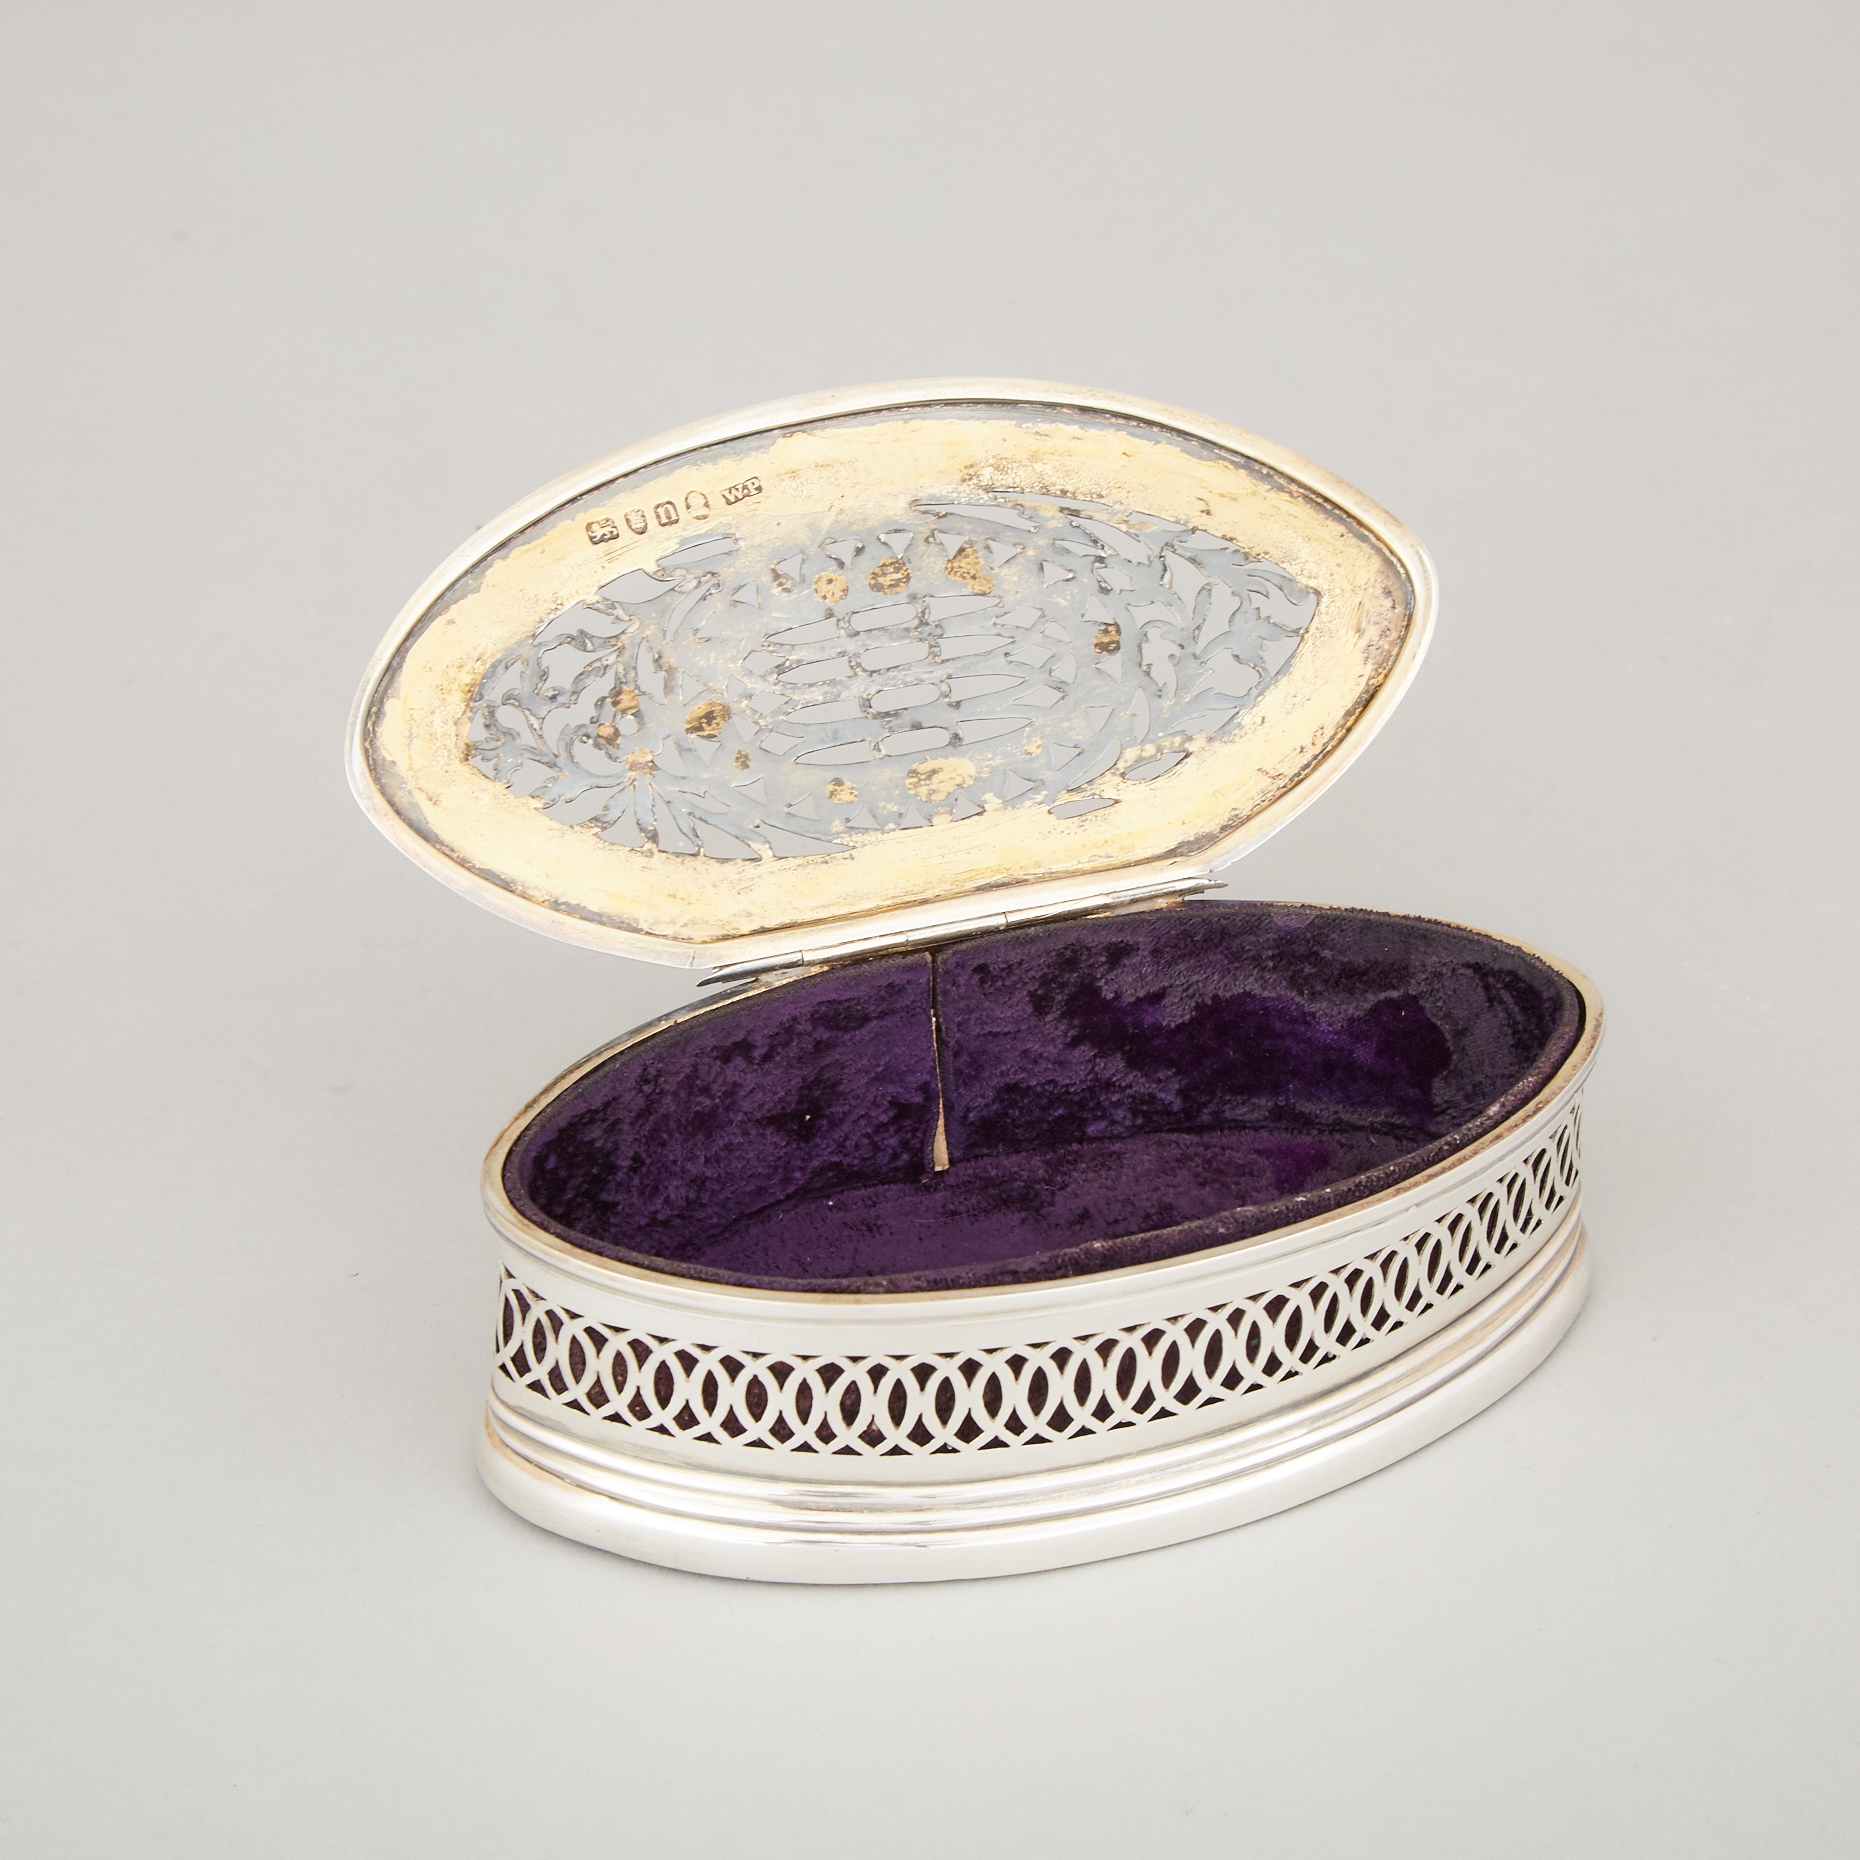 Silver Pierced Oval Box, late 18th century and later